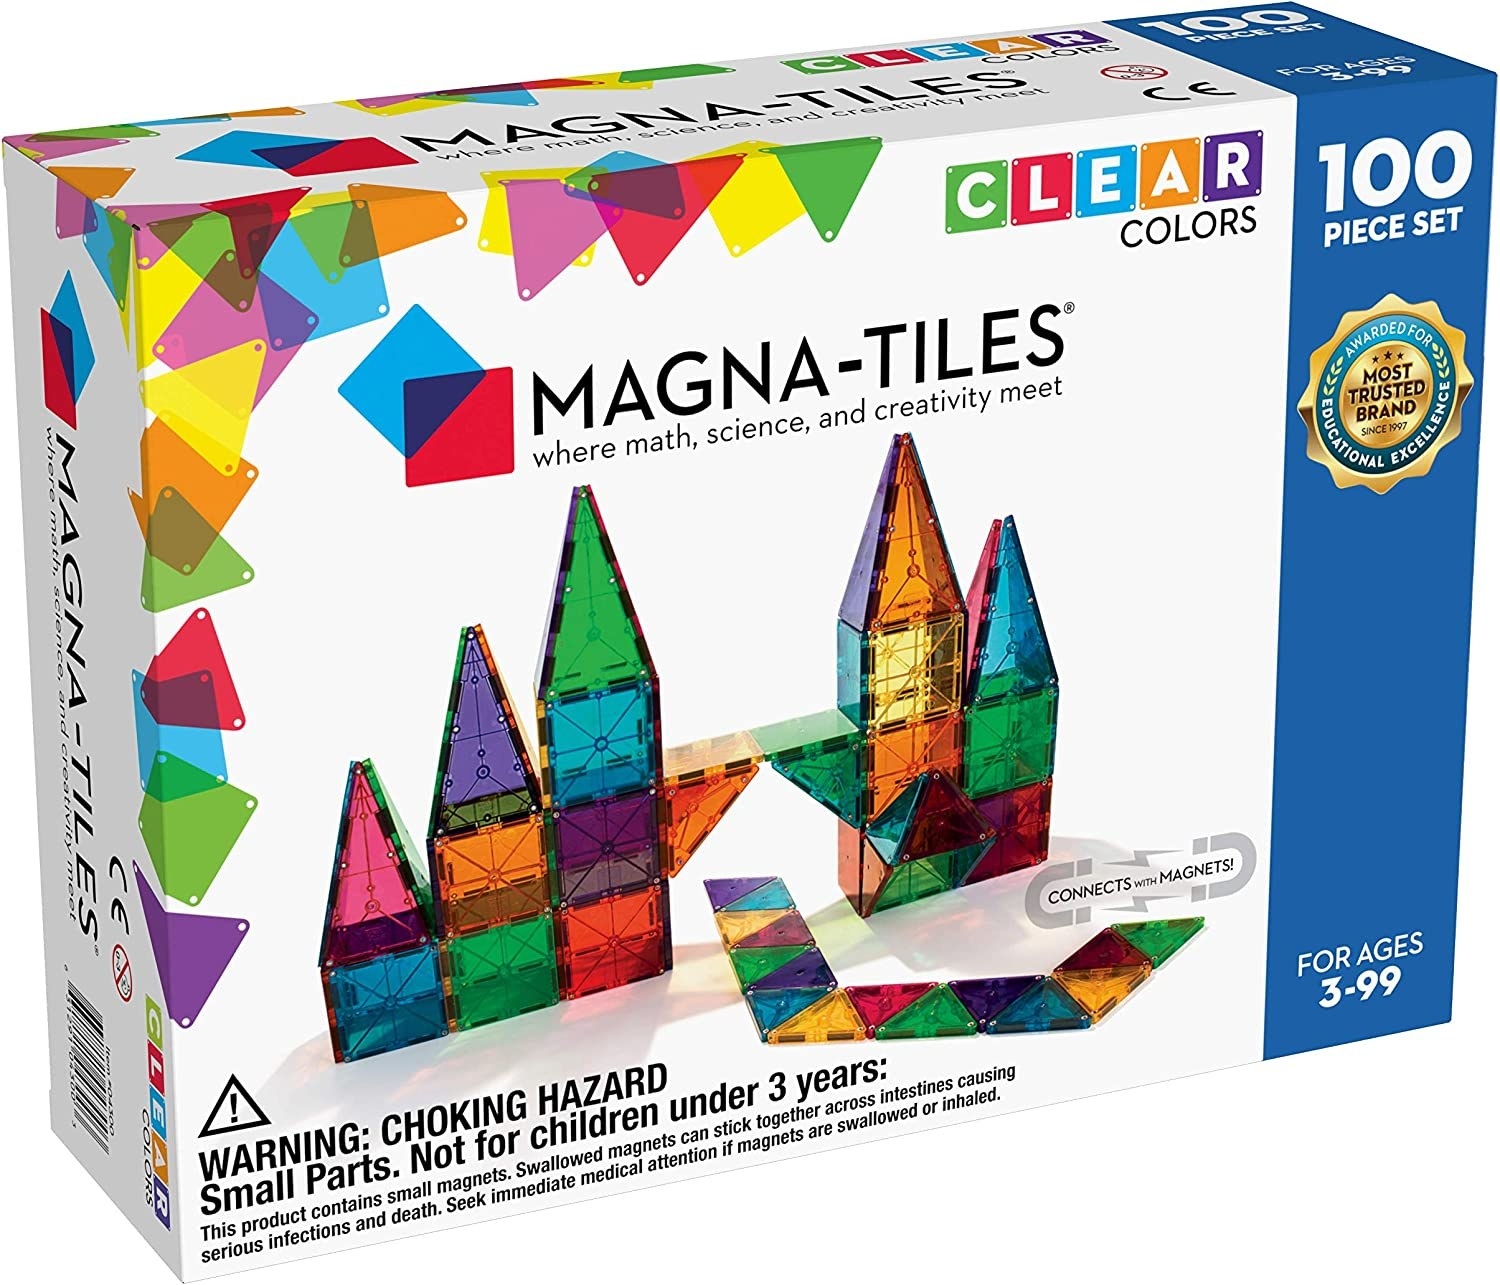 The box of tiles showing how they can be made into a castle shape